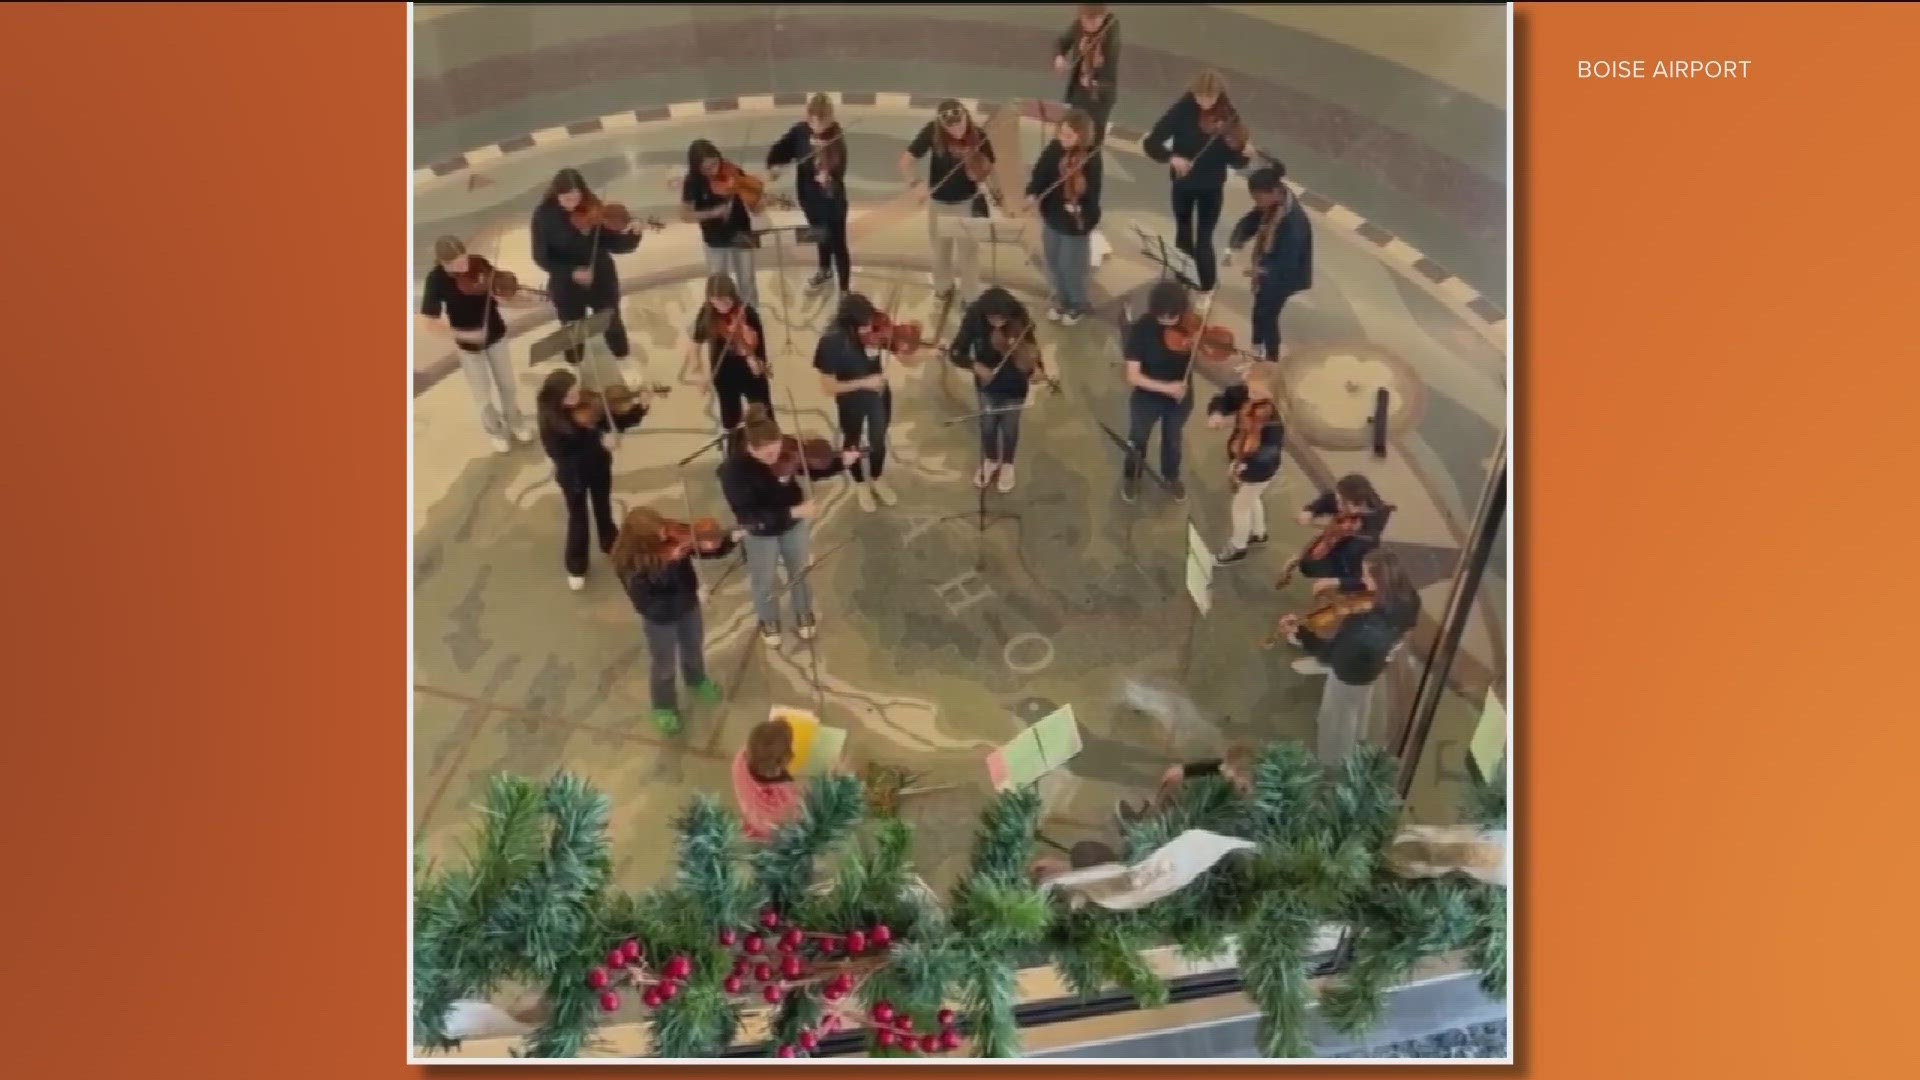 The students serenaded travelers by playing classical holiday tunes.